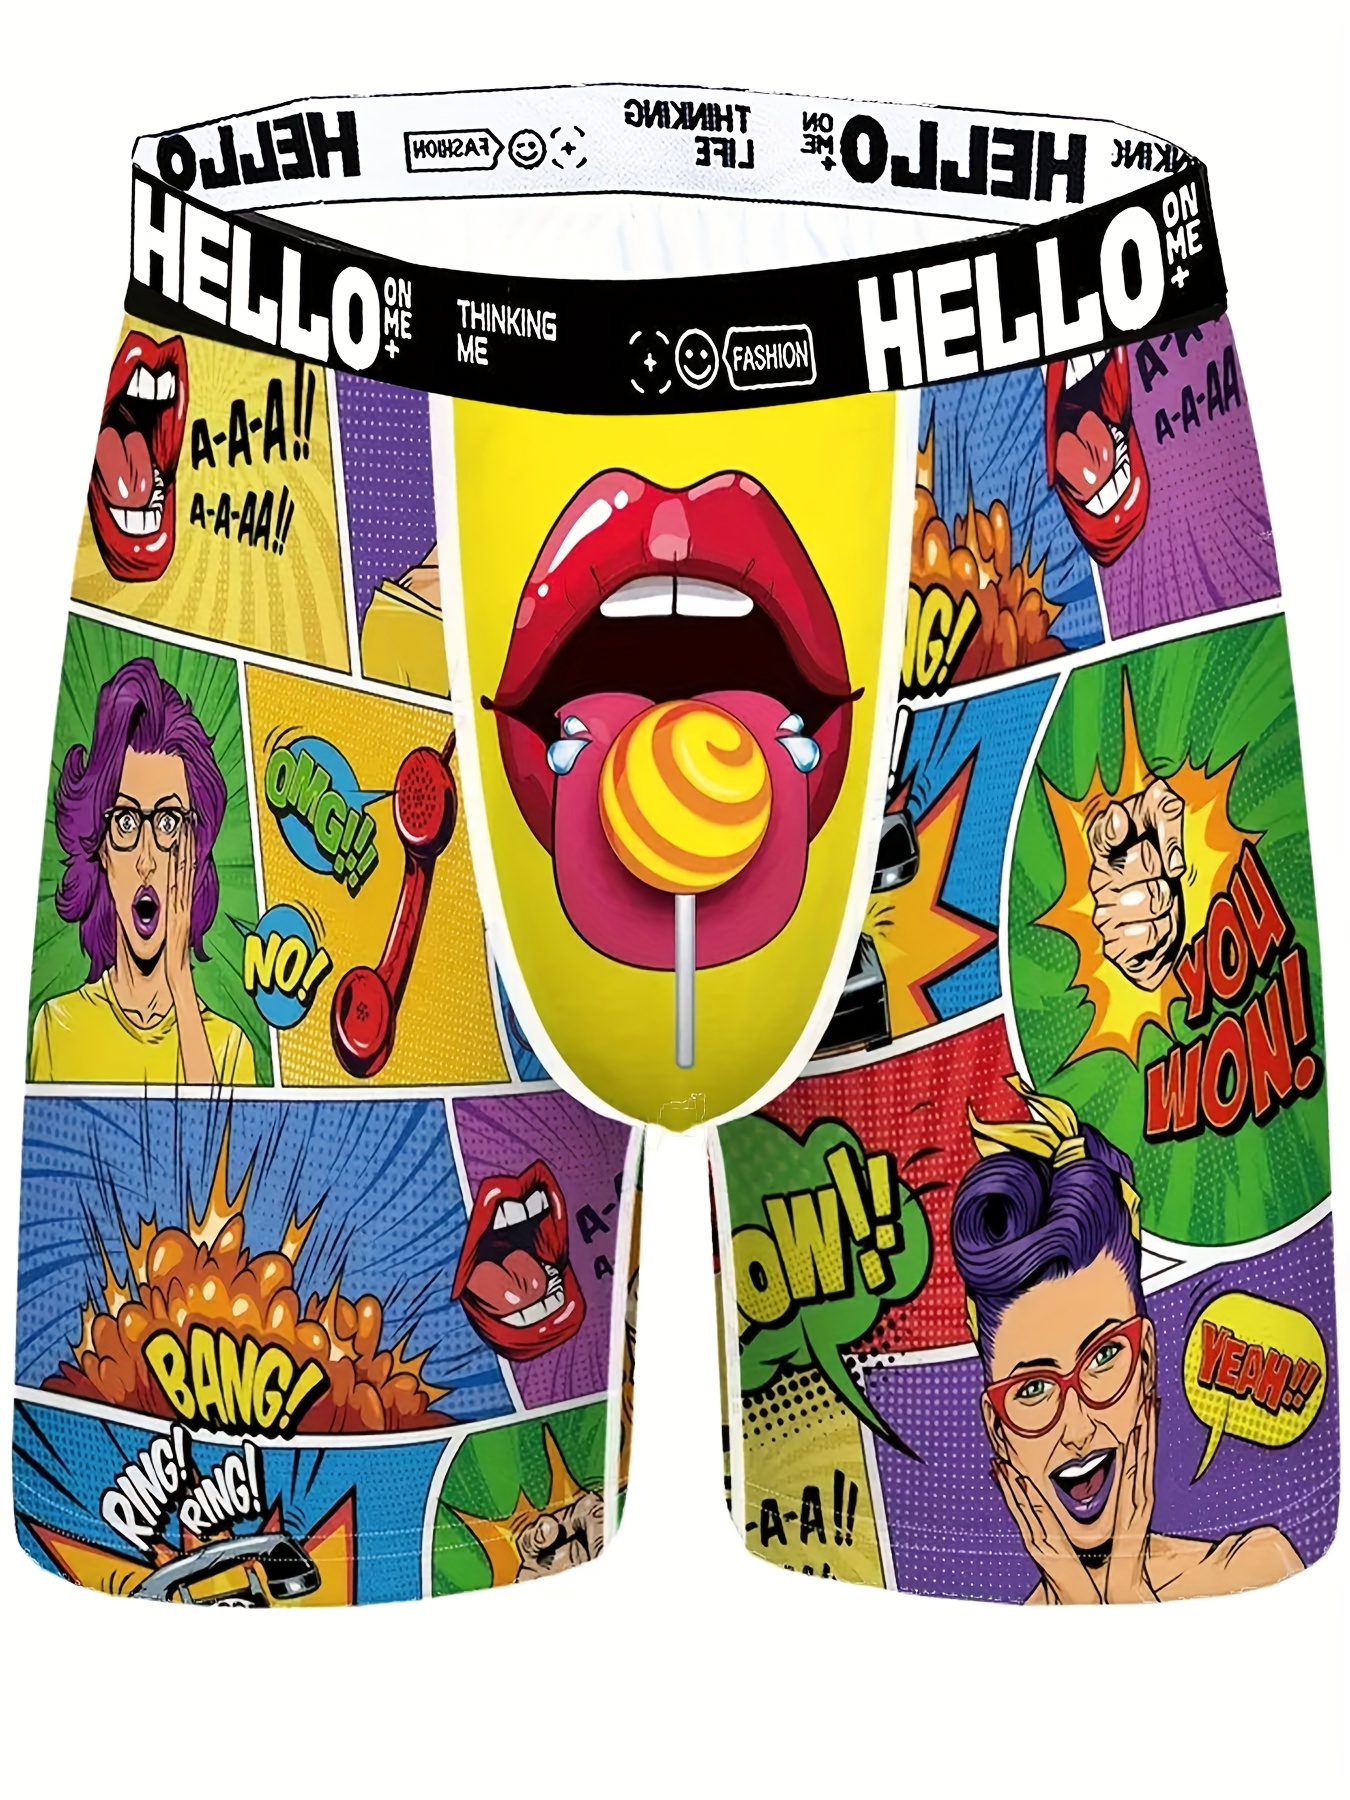 Your Face on Custom Men's Boxers With Red Lips, Personalized Funny Boxer  Briefs, Underpants, Face Underwear, Valentine's Day Gift for Him -   Canada